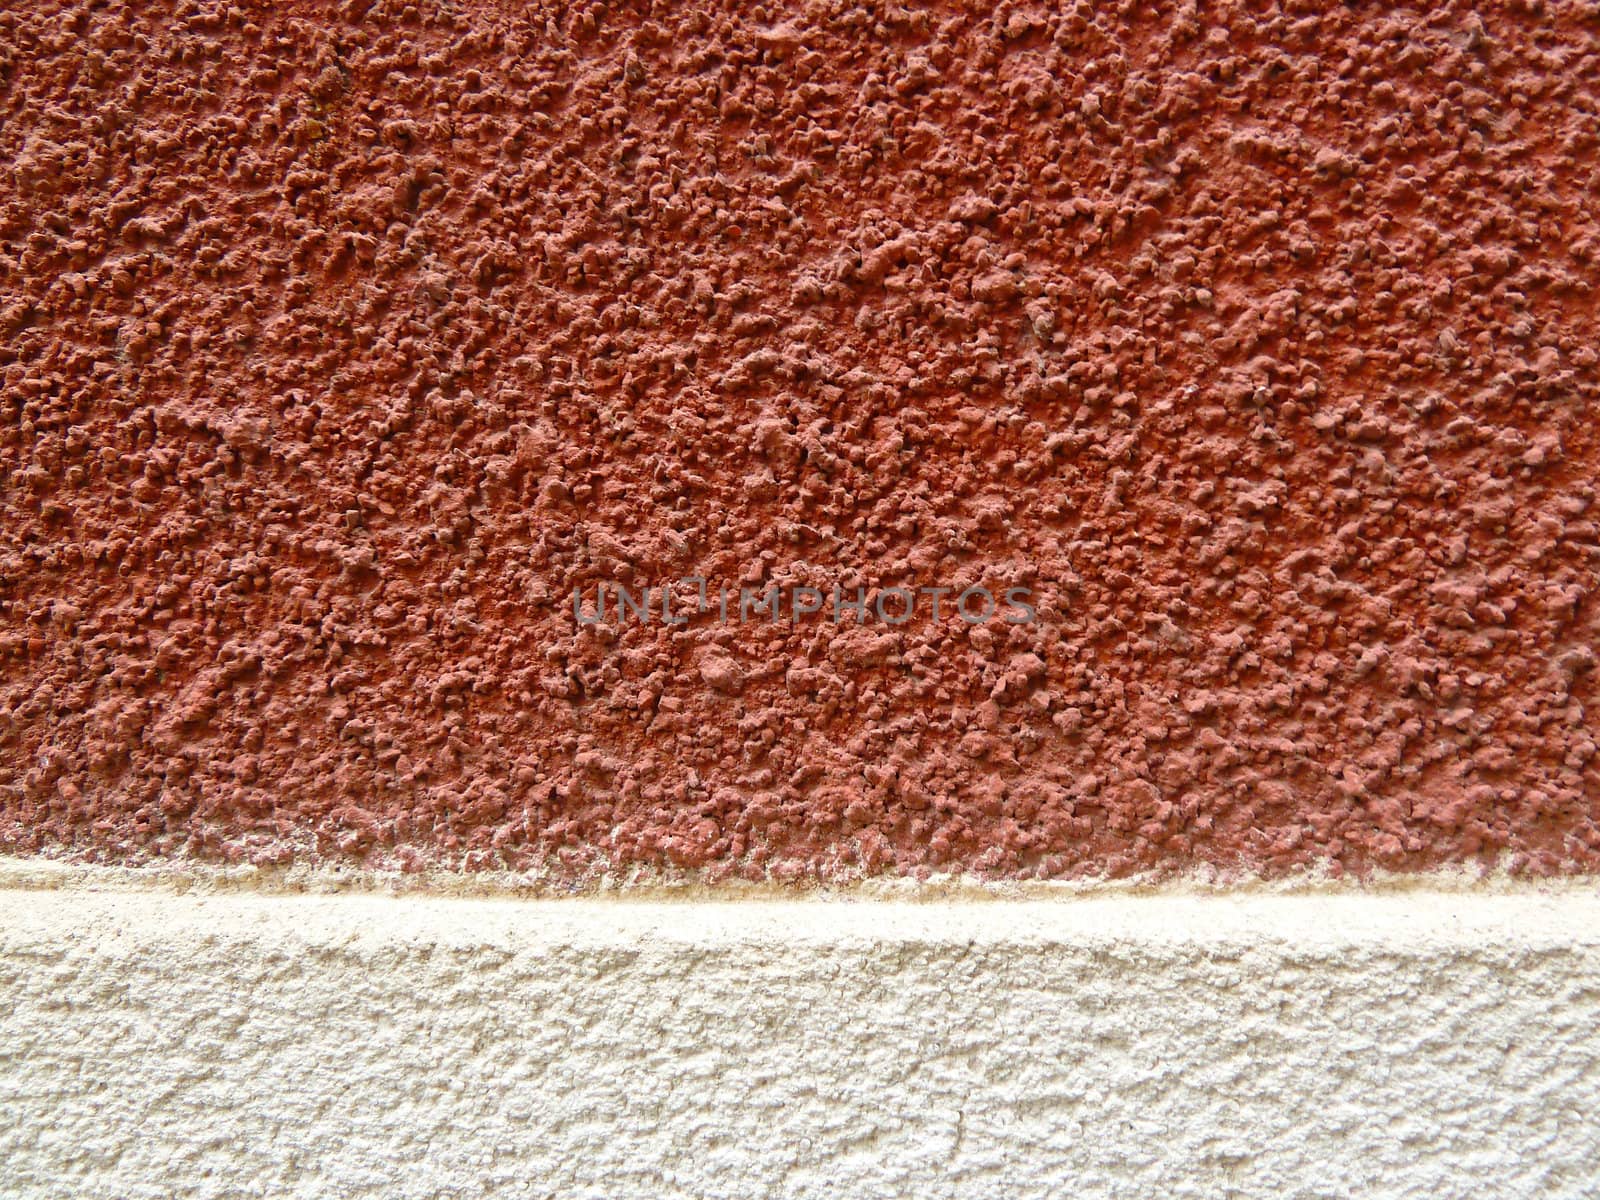 red and white textured surface as background